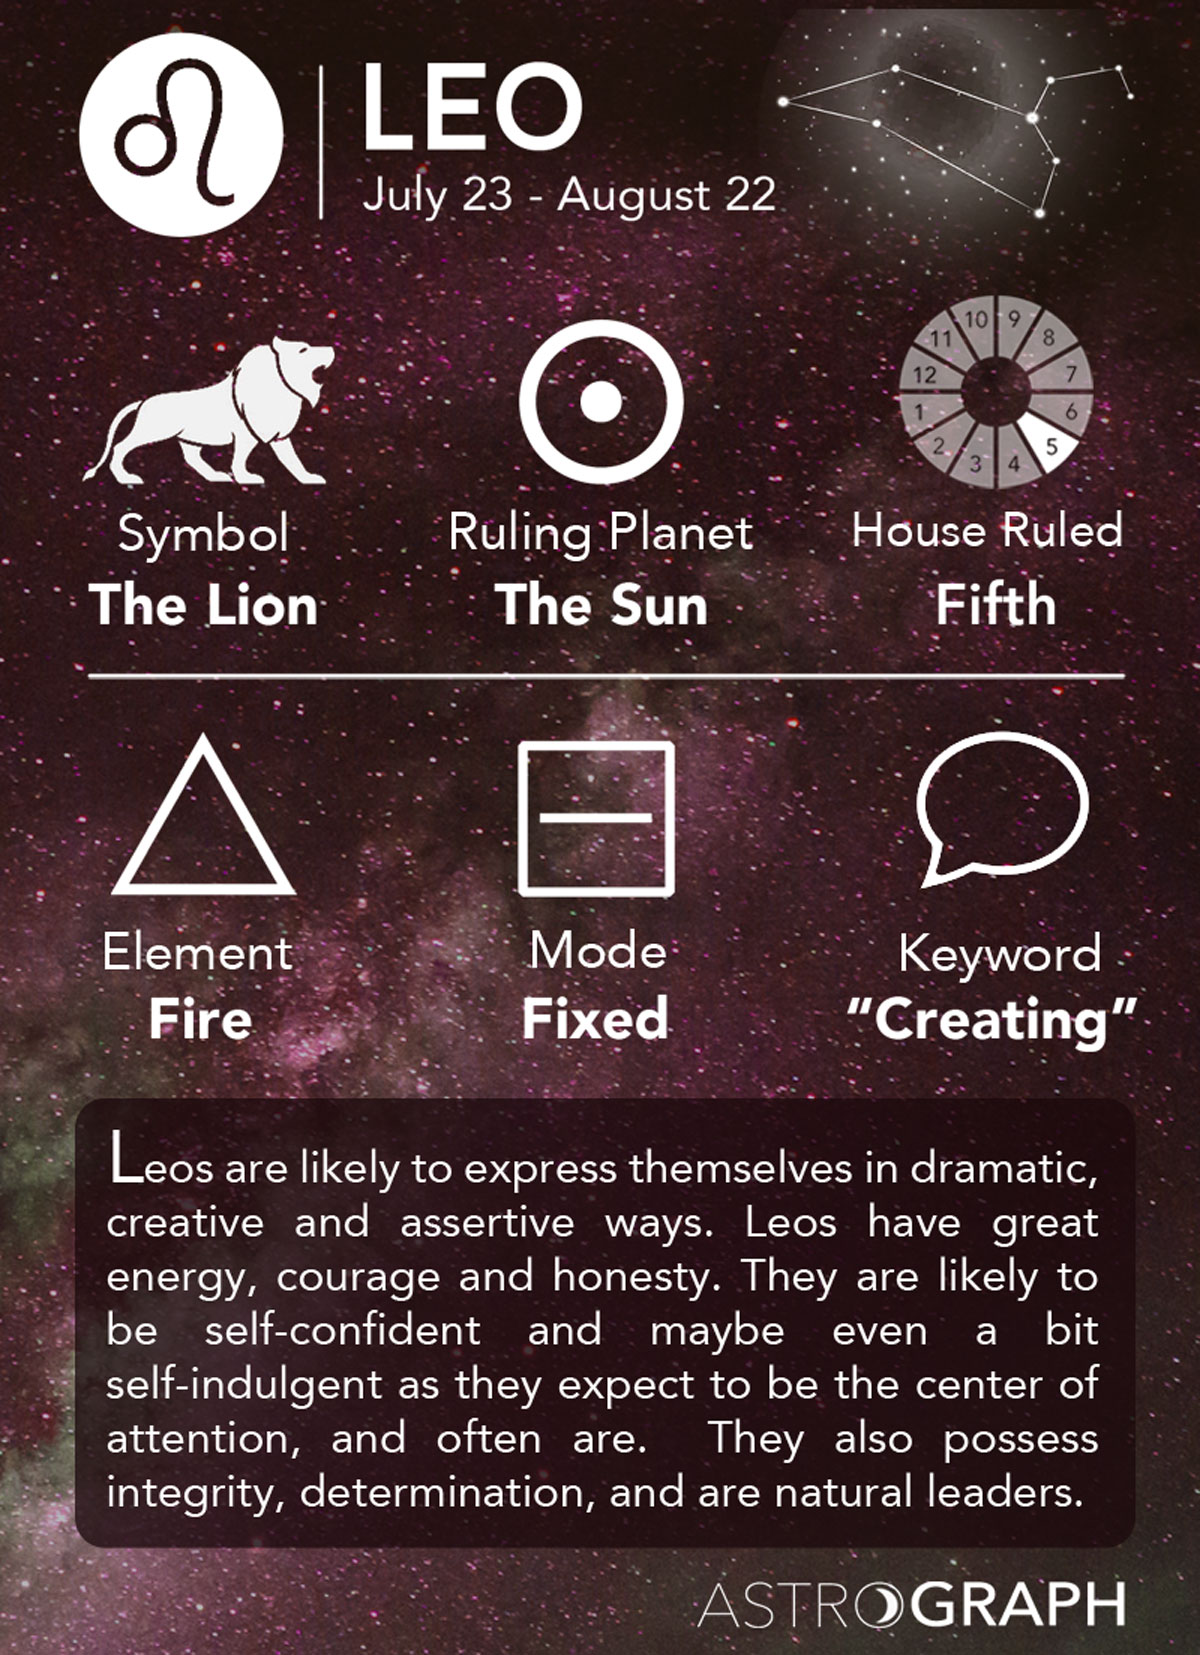 what does fixed mode mean in astrology